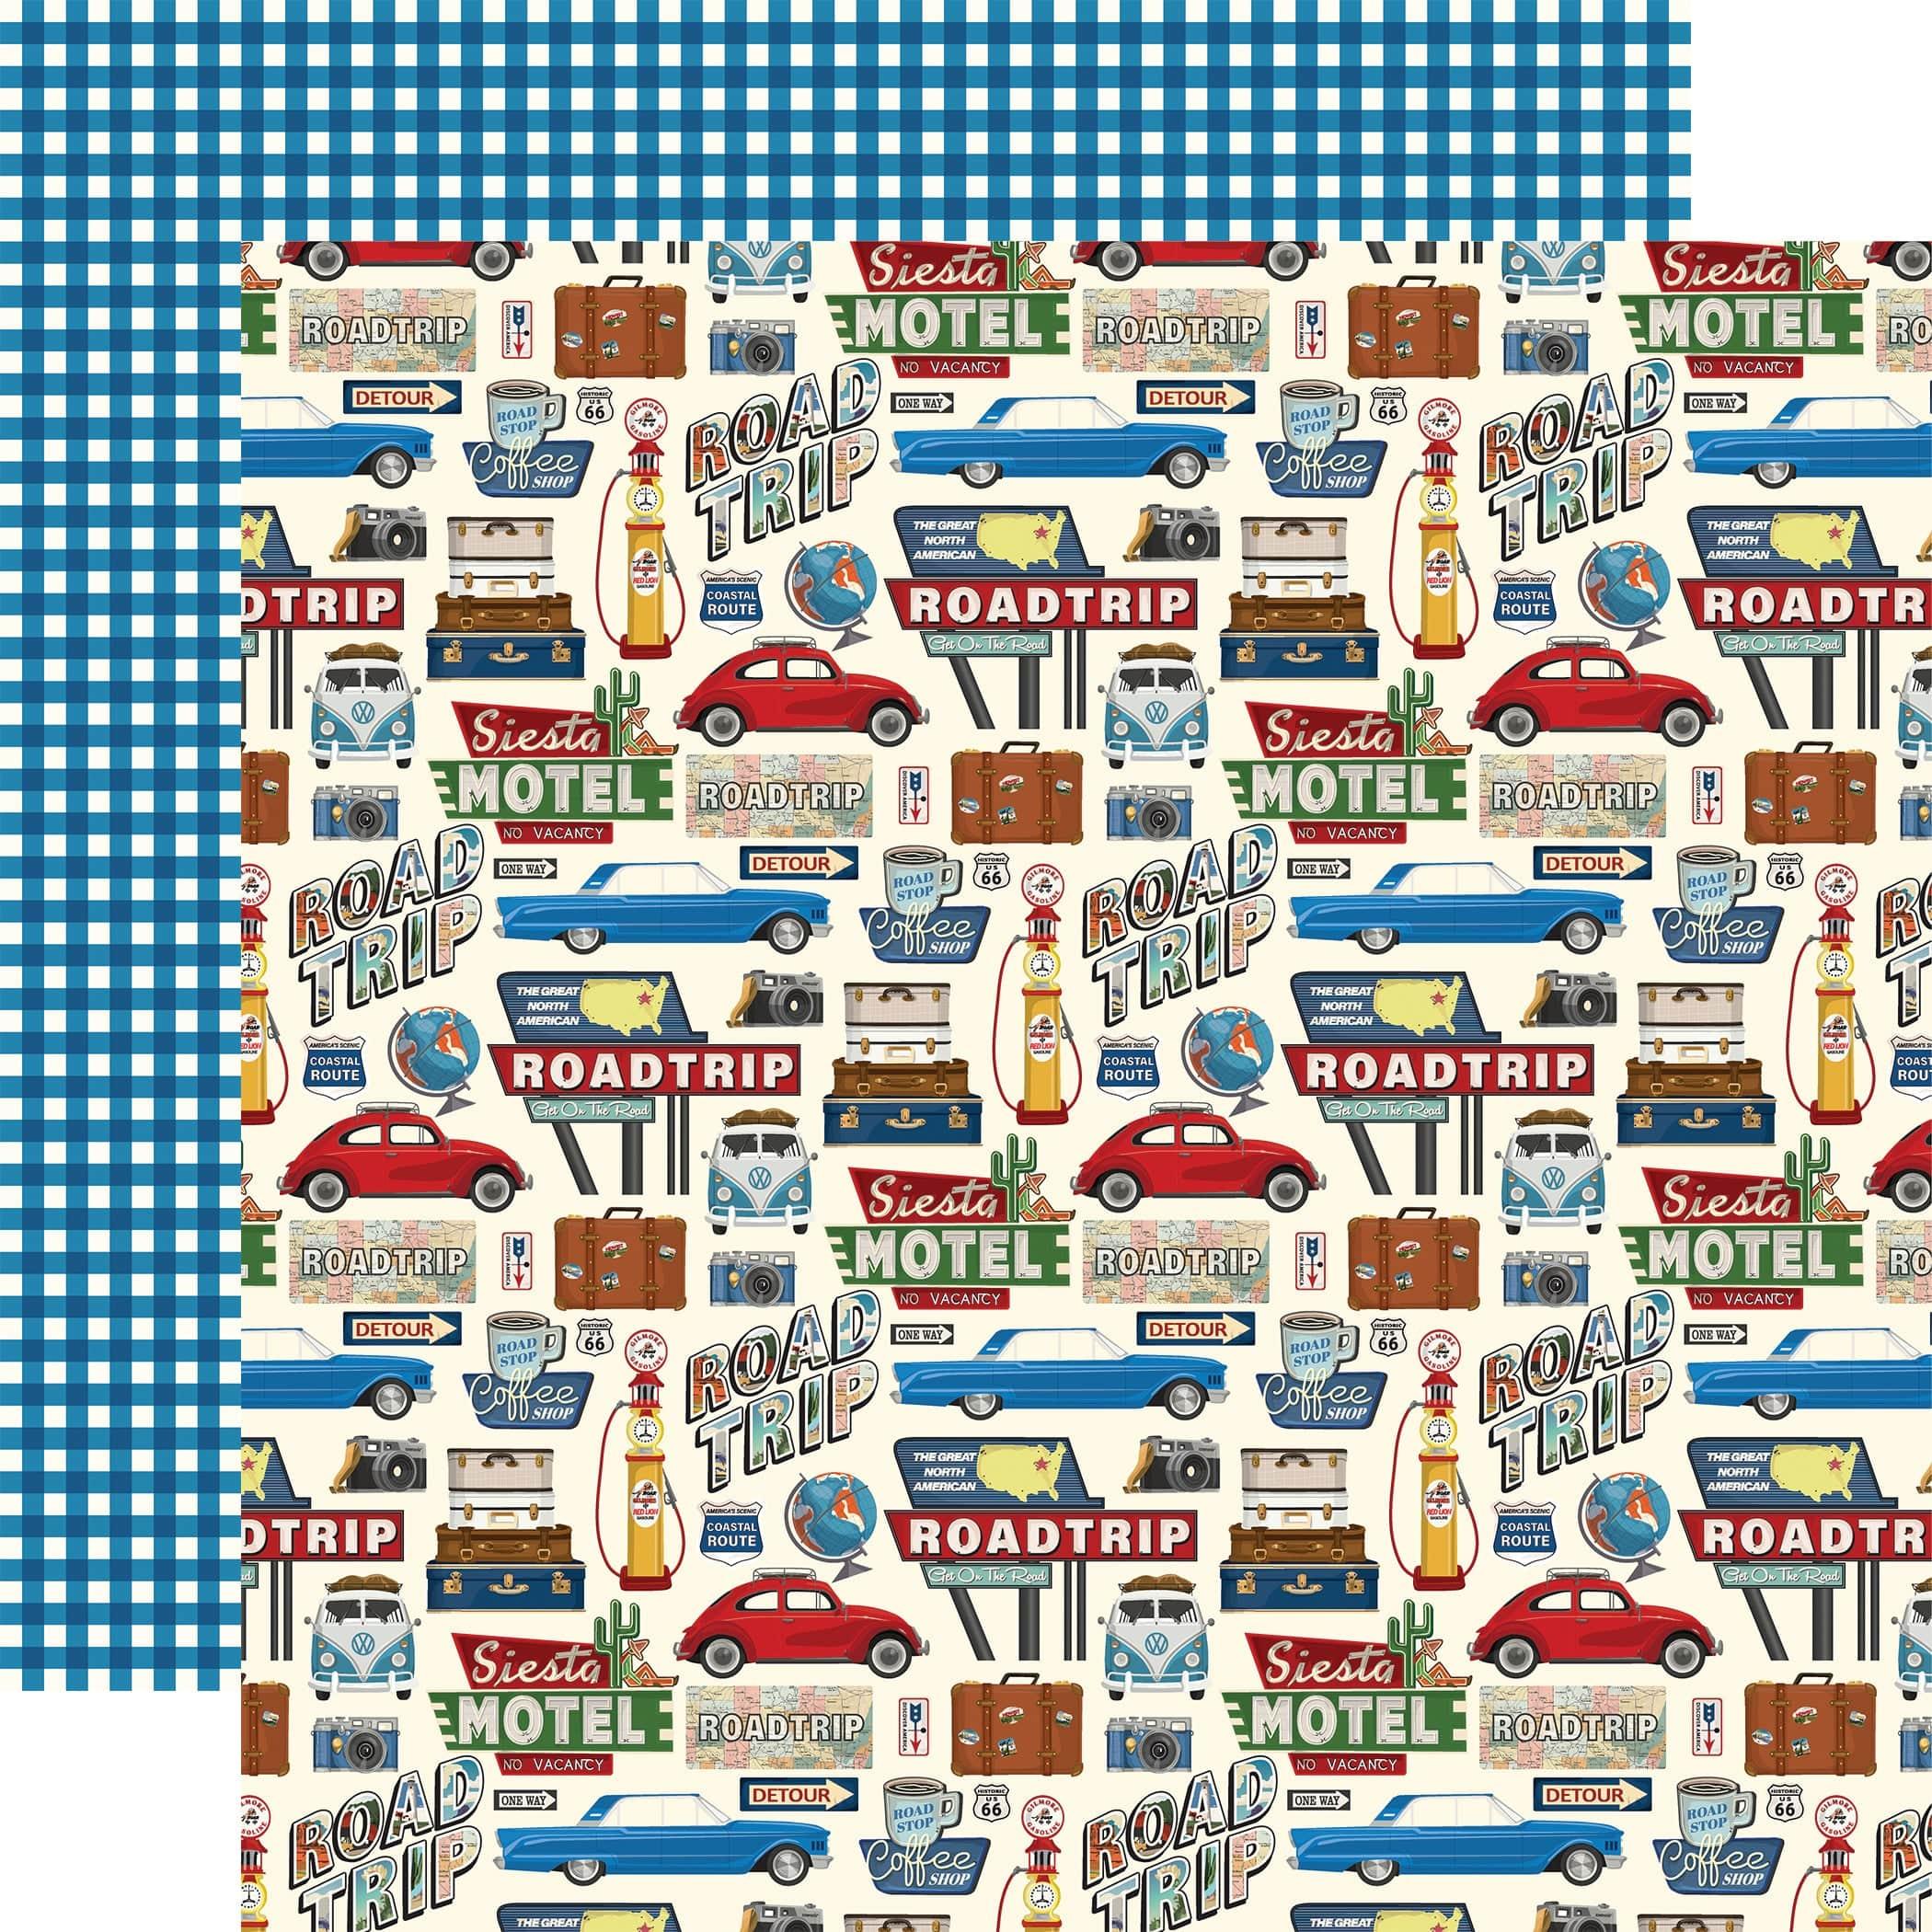 Road Trip Collection Road Trip 12 x 12 Double-Sided Scrapbook Paper by Carta Bella - Scrapbook Supply Companies